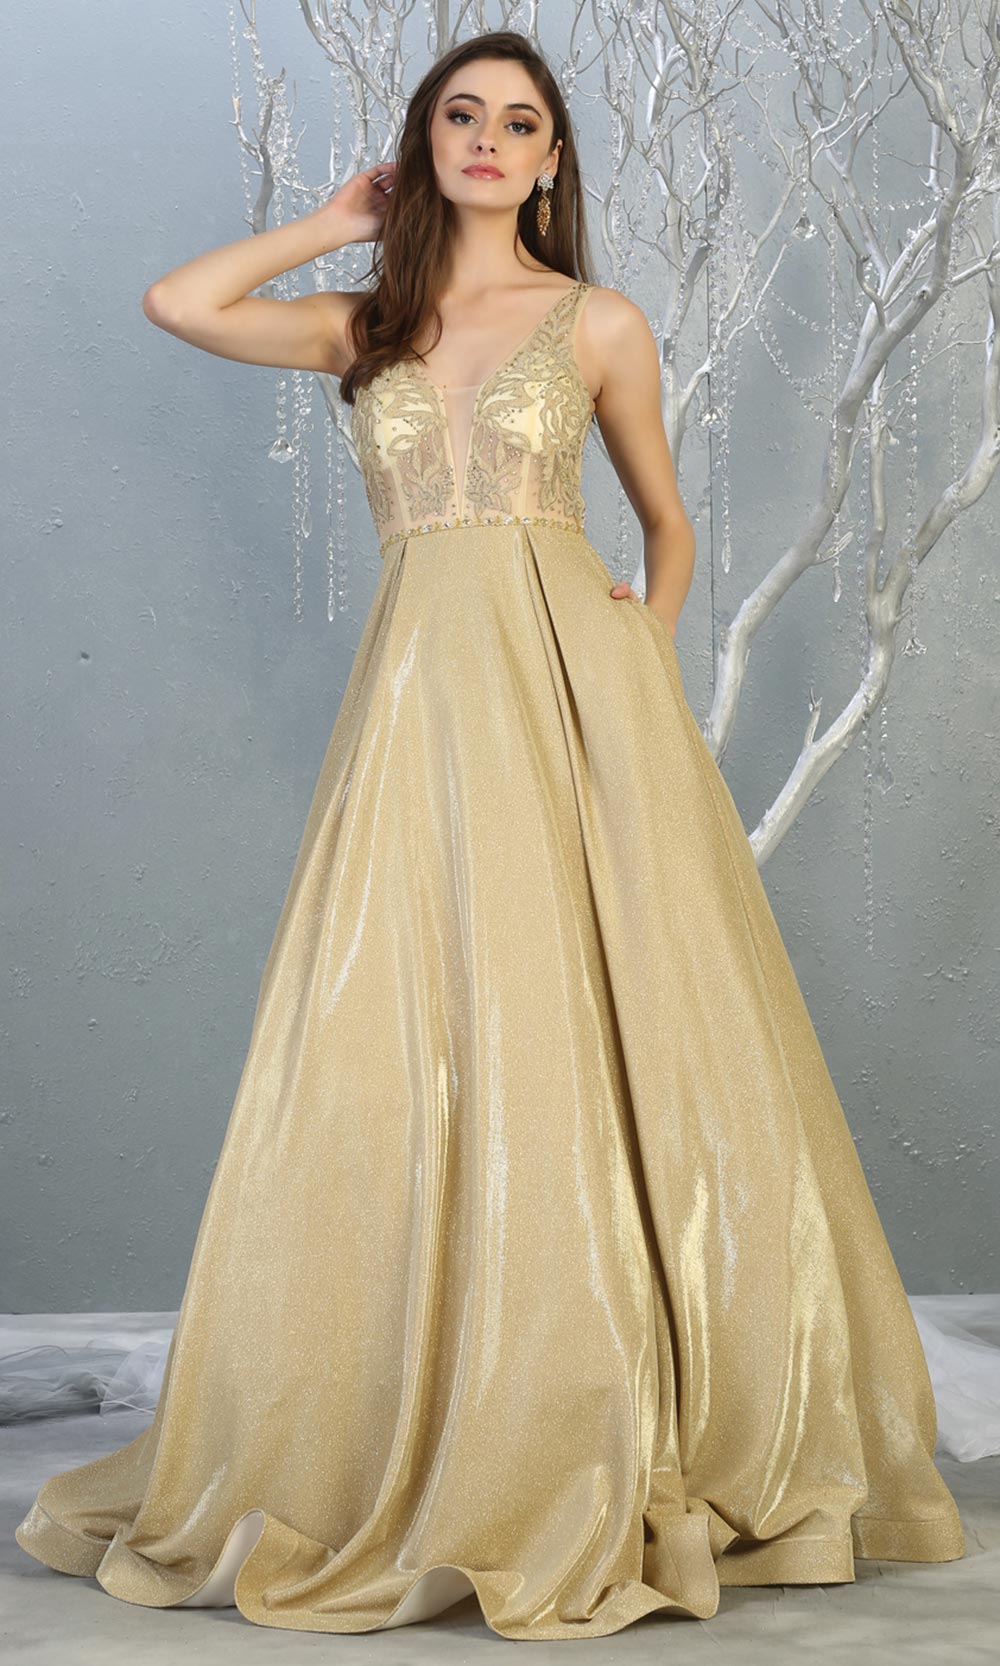 Mayqueen RQ7847 long gold metallic v neck evening gown w/straps & low back. Full length flowy gold gown is perfect for  enagagement/e-shoot dress, formal wedding guest, evening party dress, prom, engagement, wedding reception. Plus sizes avail.jpg